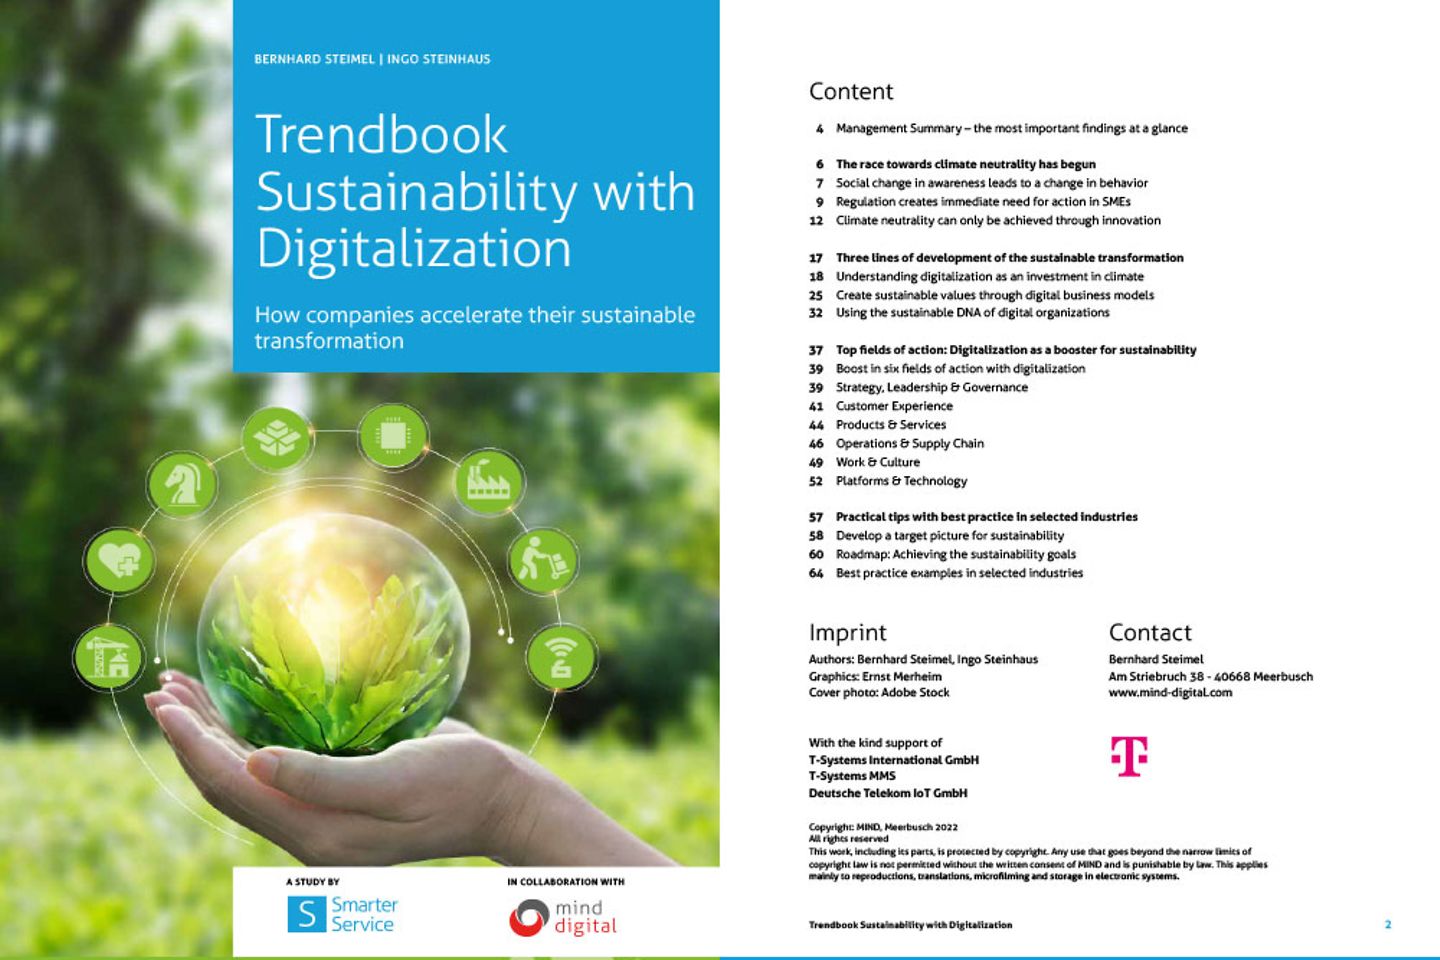 Cover and the next page of the trend book as a screenshot: Sustainability and Digitalization